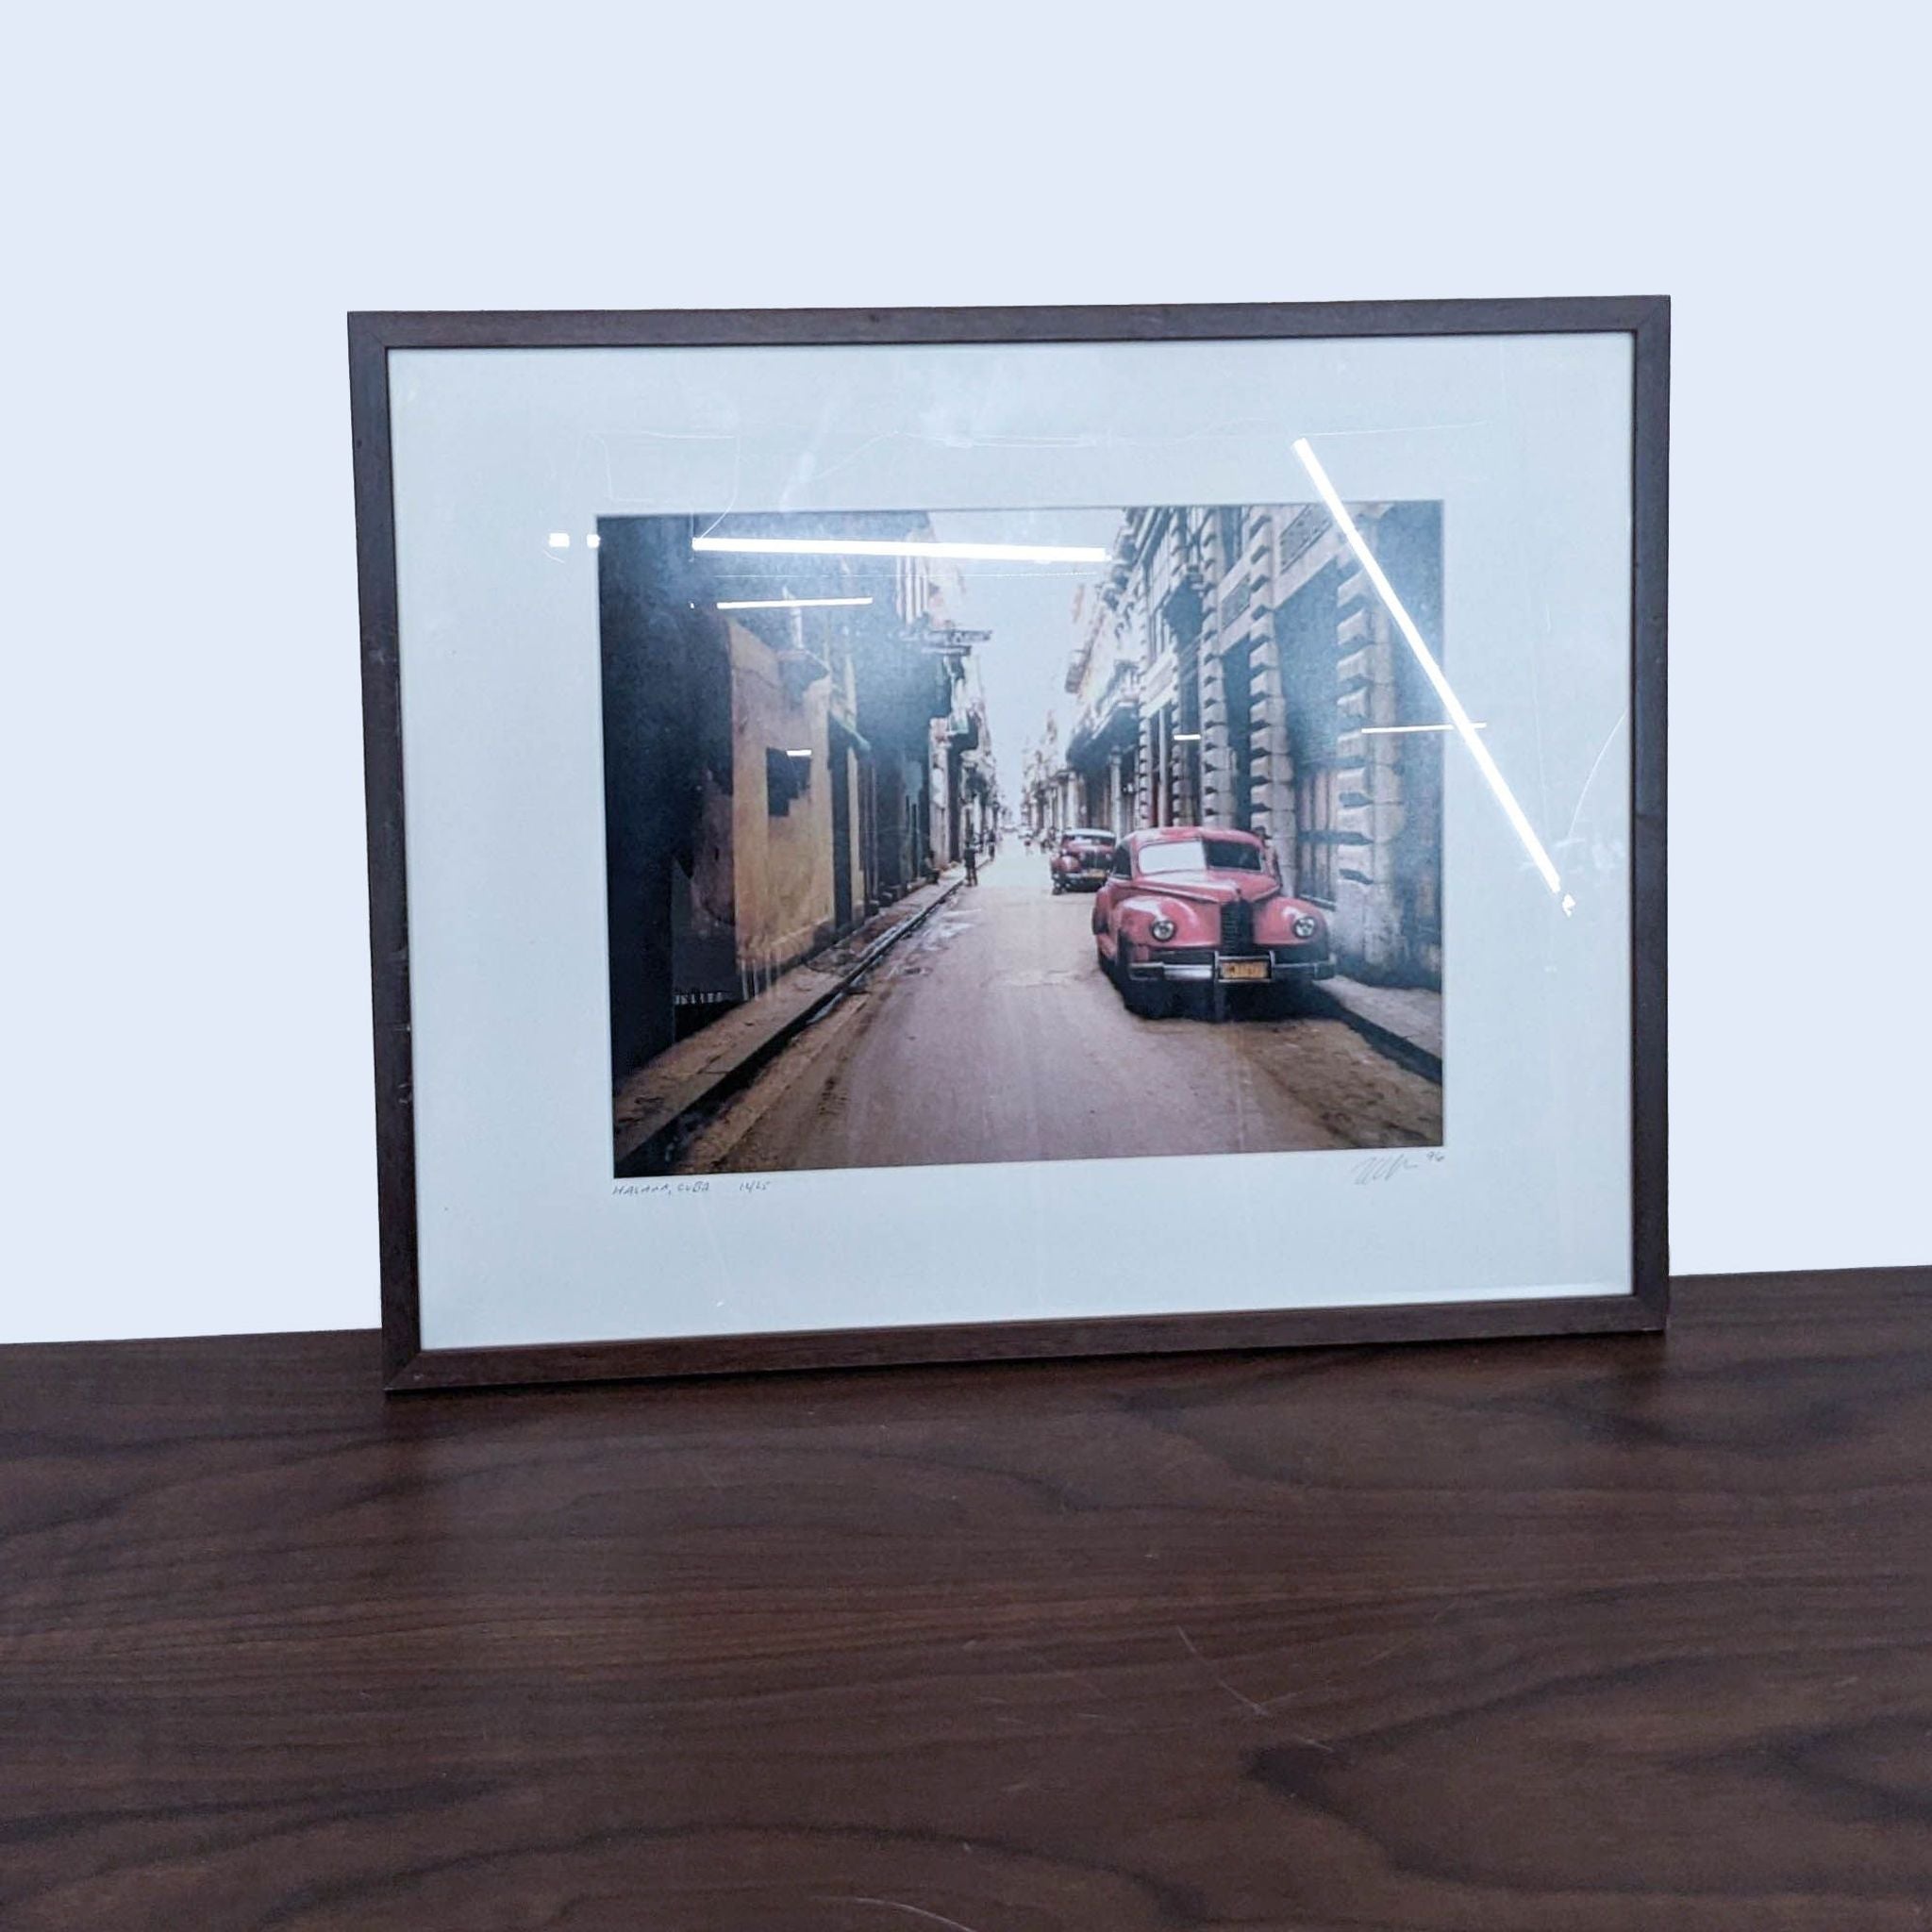 2. Reperch-brand art print featuring a vintage red car in an old Havana alley, limited edition numbered 12/25, framed.